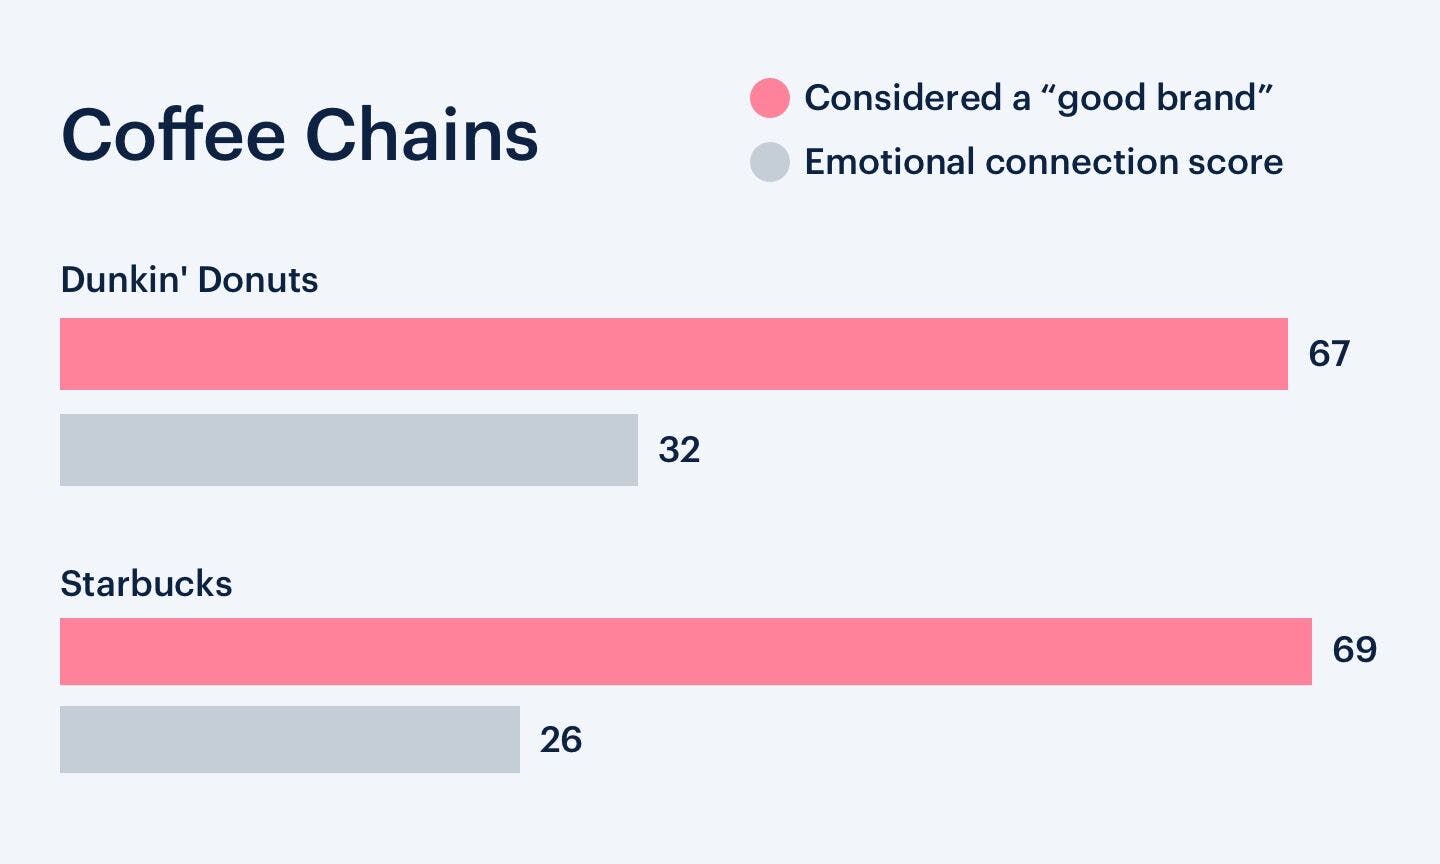 The Emotional Connection score